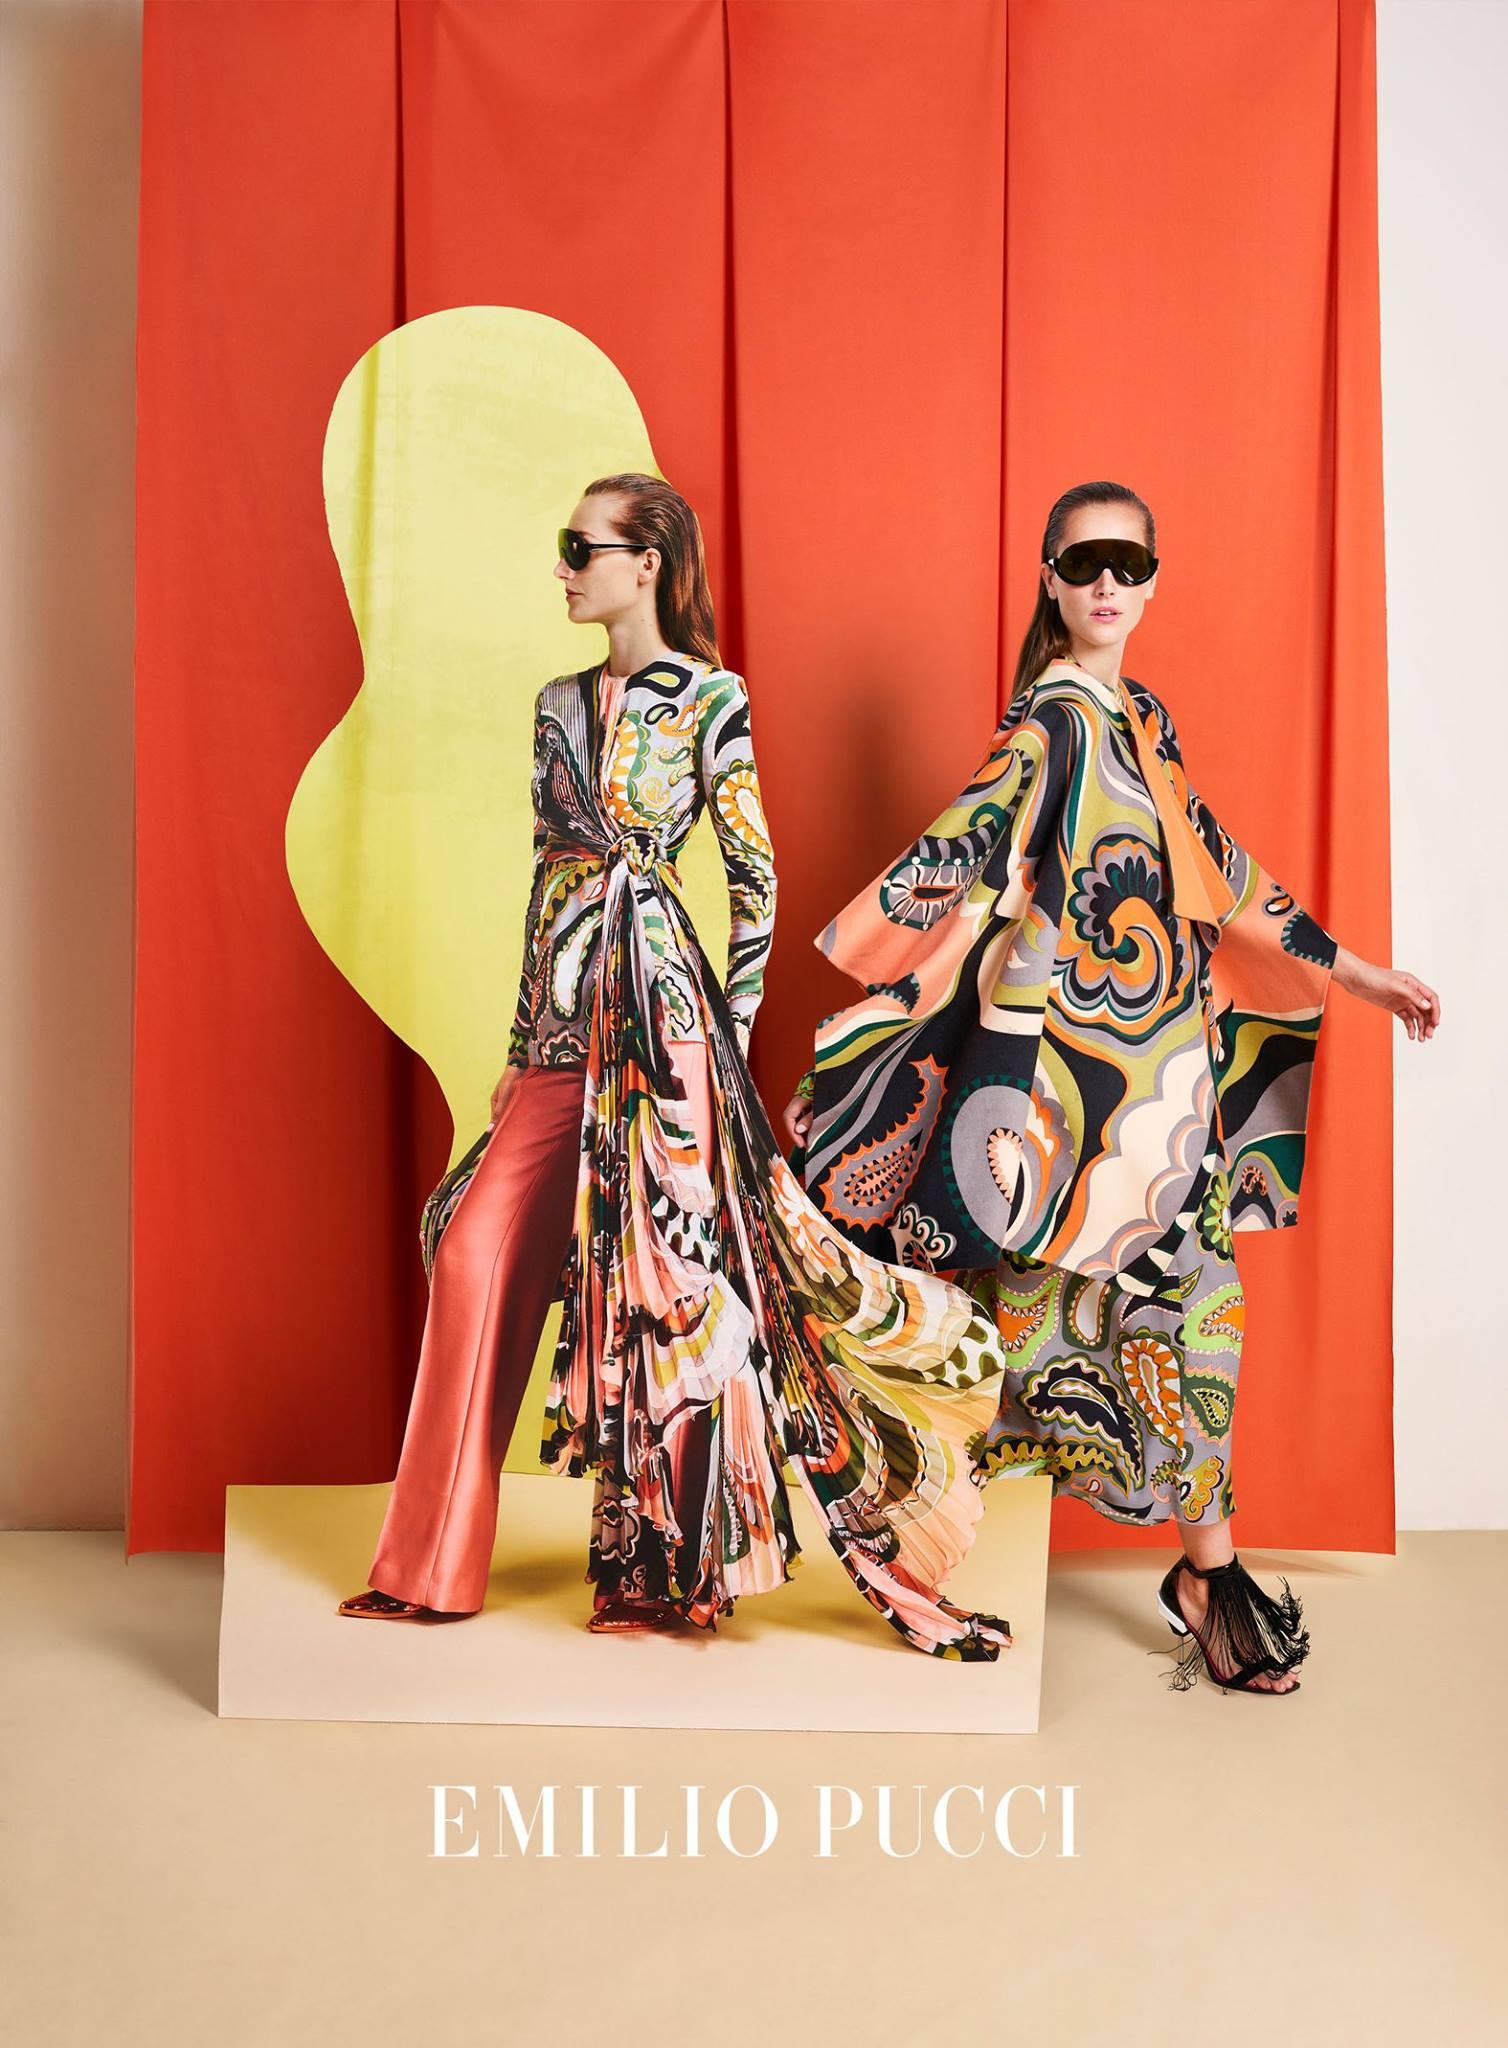 First Look at Emilio Pucci's Fall Winter 2017/2018 Campaign